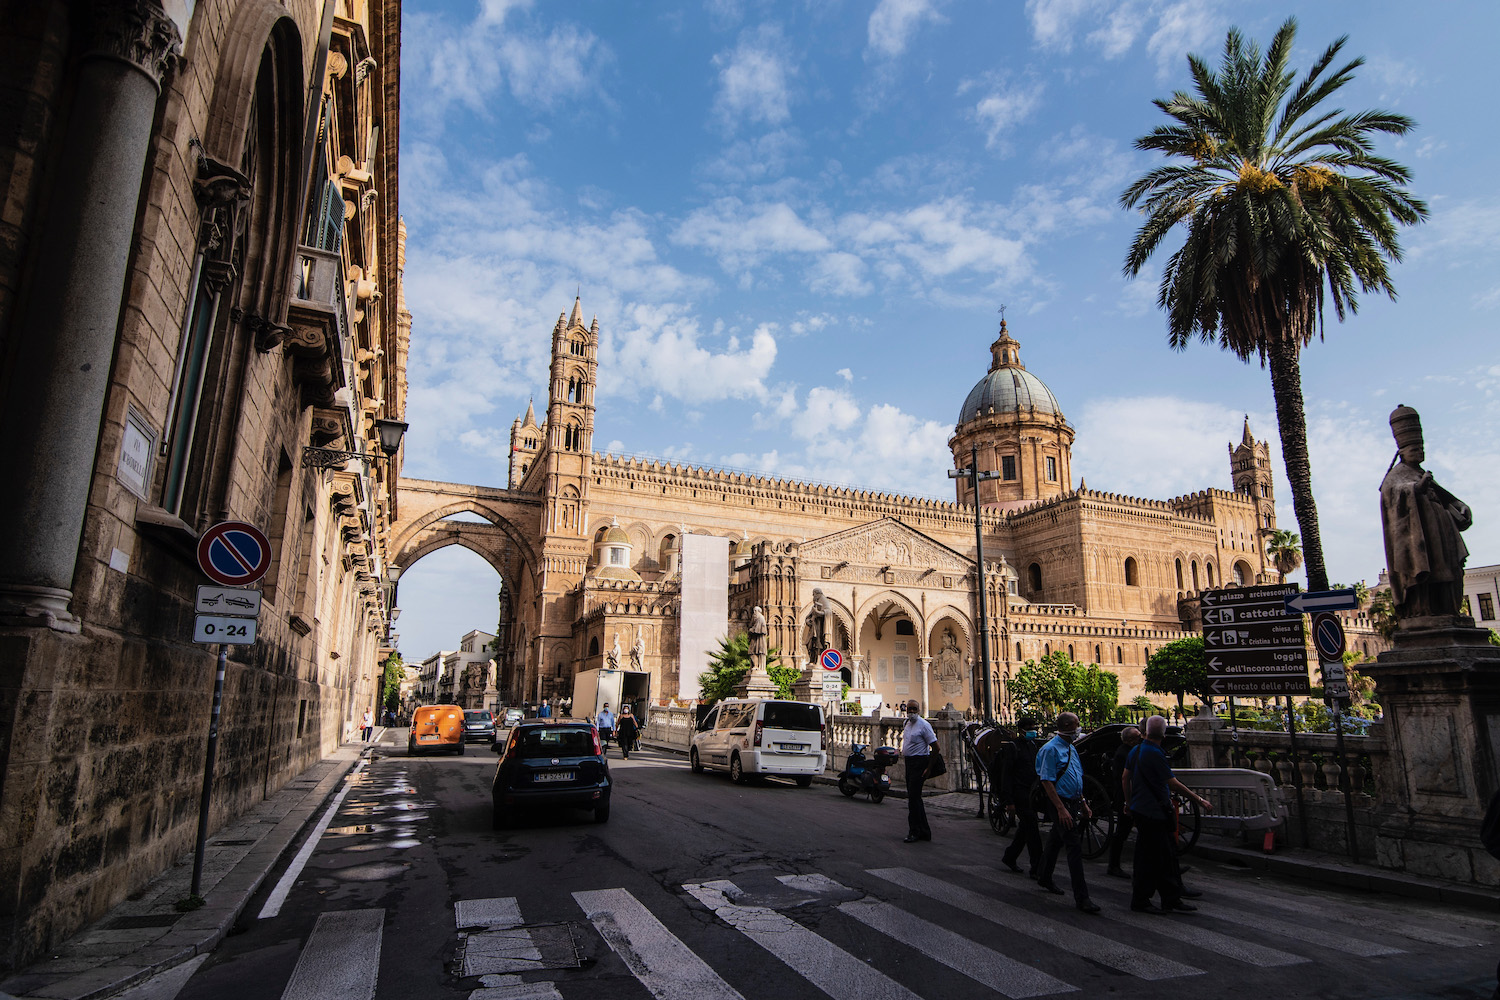 Why Should you go to Sicily?